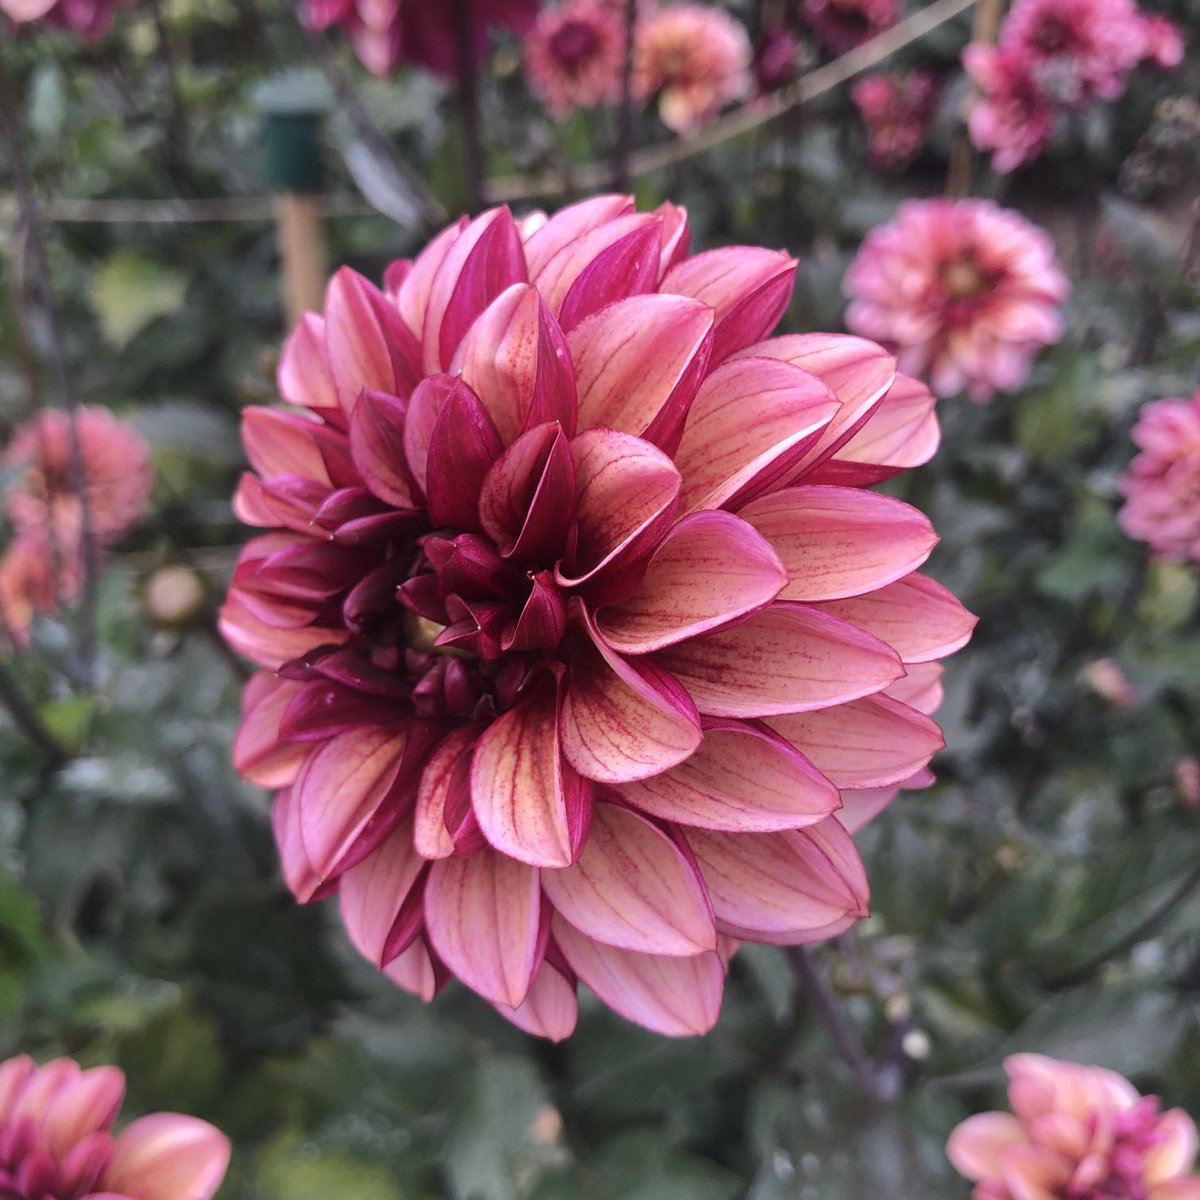 Dahlia ‘Senior’s Hope’ in our trial at Wisley. A fantastic flower head, but controversial name…⁦@The_RHS⁩ ⁦@RHSWisley⁩ #gardens #flowers #trial